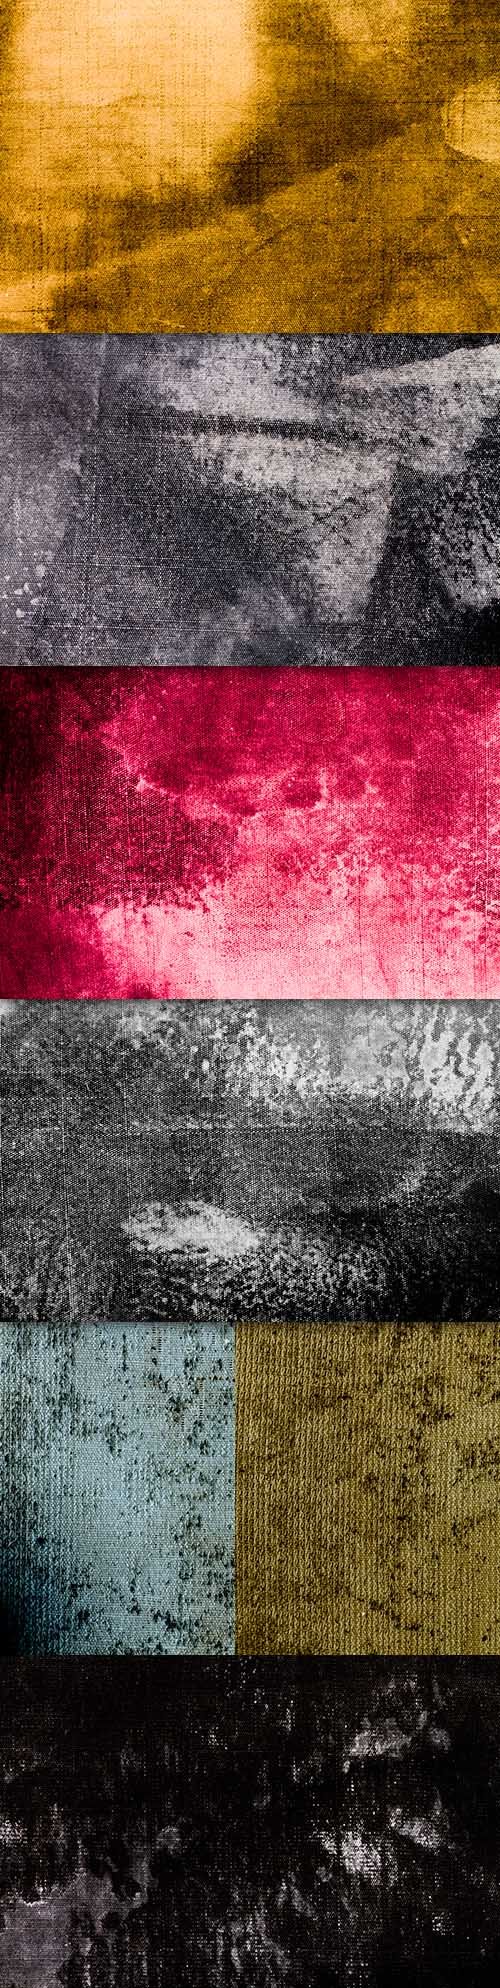 Colored grunge texture fabric and canvas